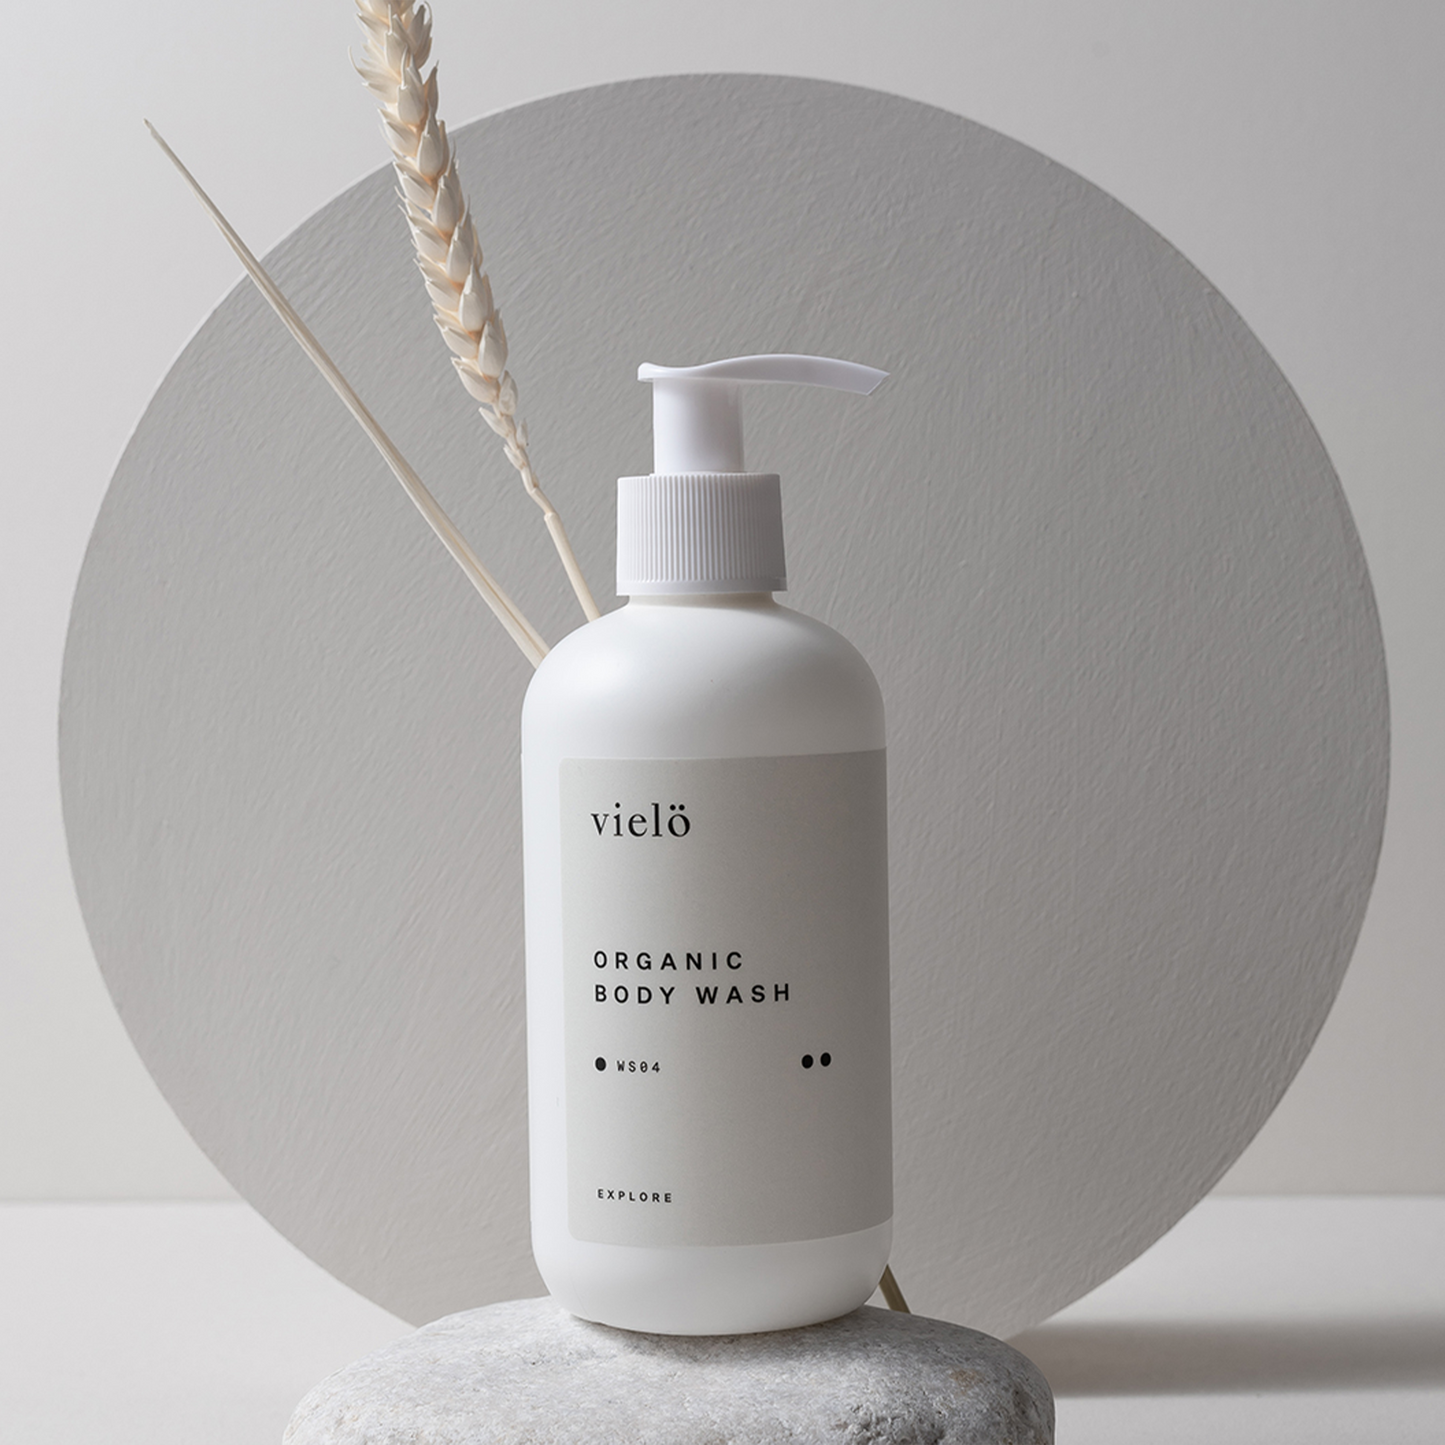 Vielo Organic Body Wash: Nourishing organic body wash, specially designed to cleanse, nourish and moisturize dry and sensitive skin gently. Suitable for all skin types.